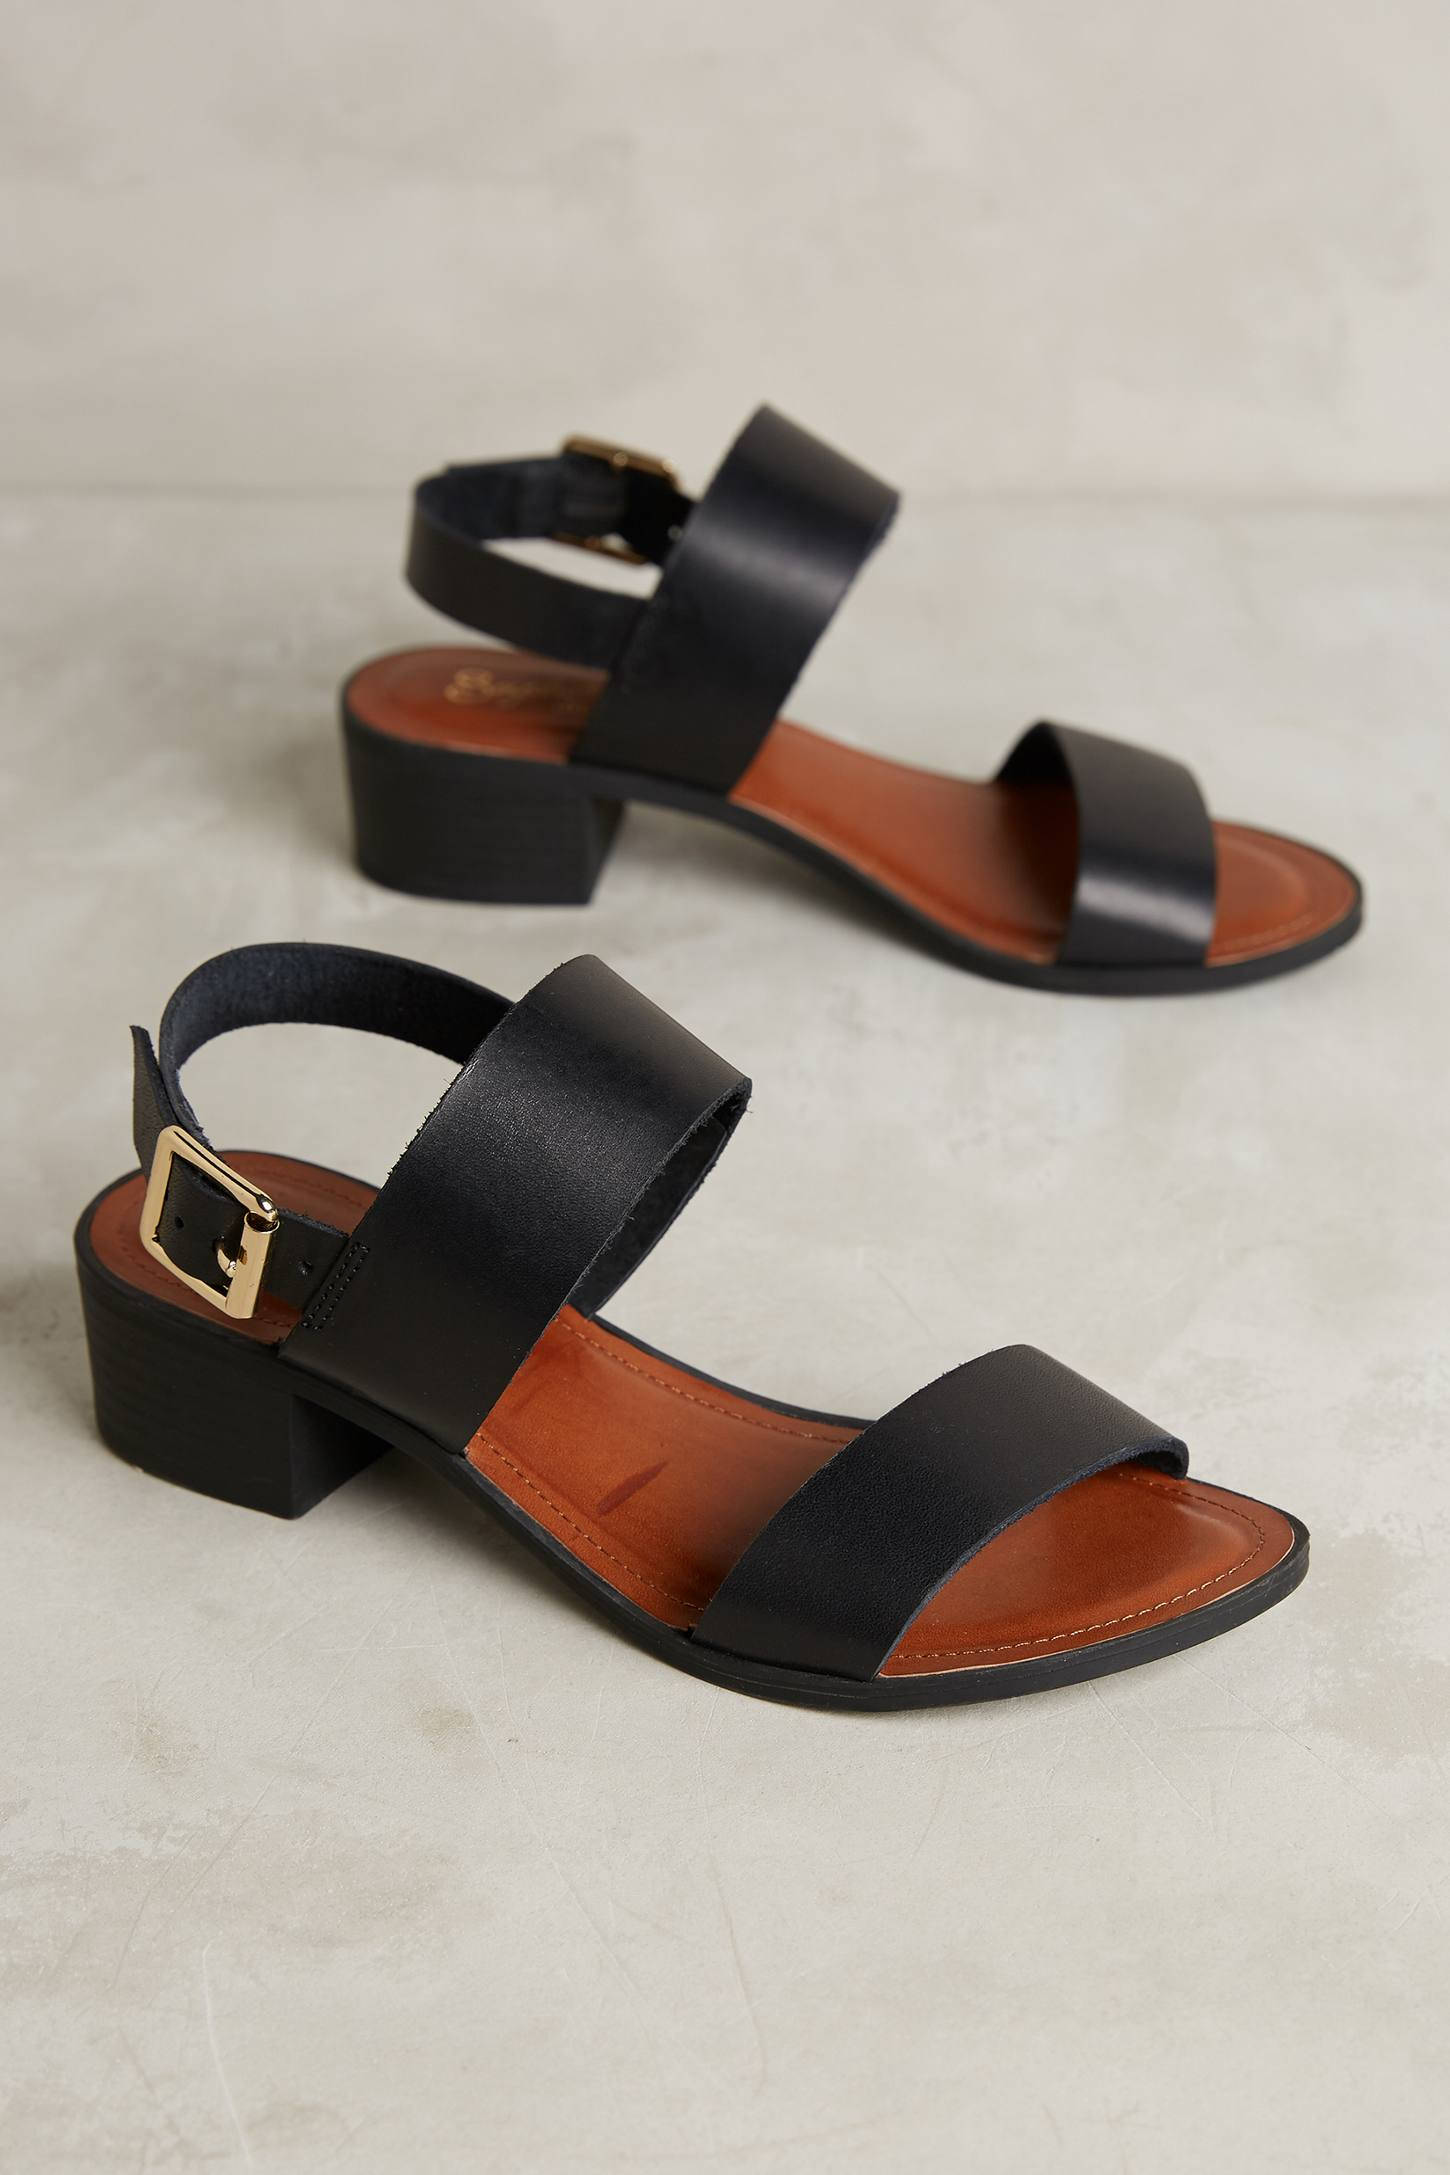 Lyst - Seychelles Cassiopeia Sandals in Black